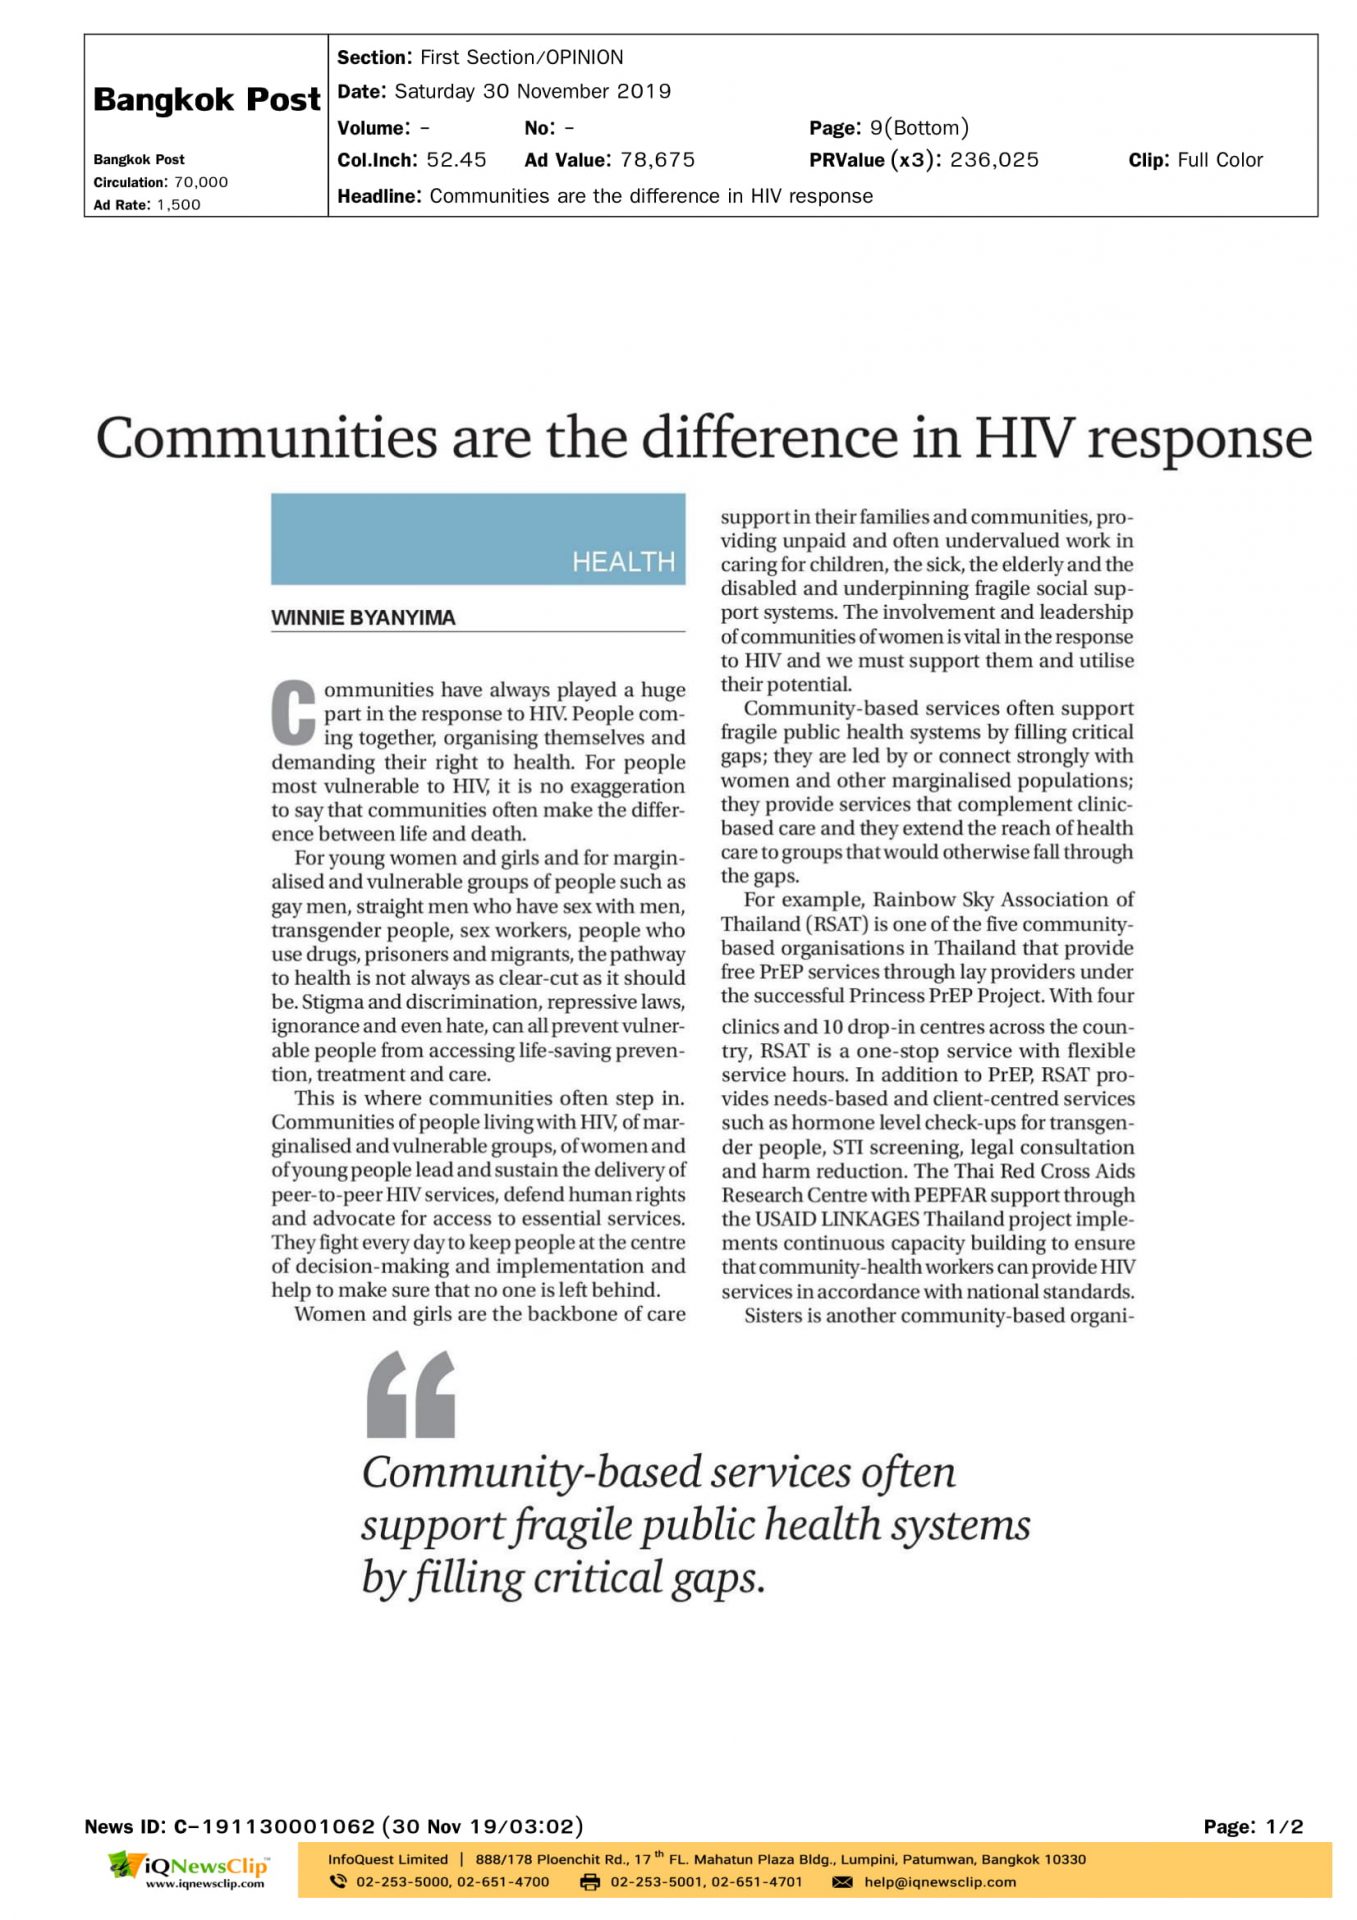 Communities are the difference in HIV response